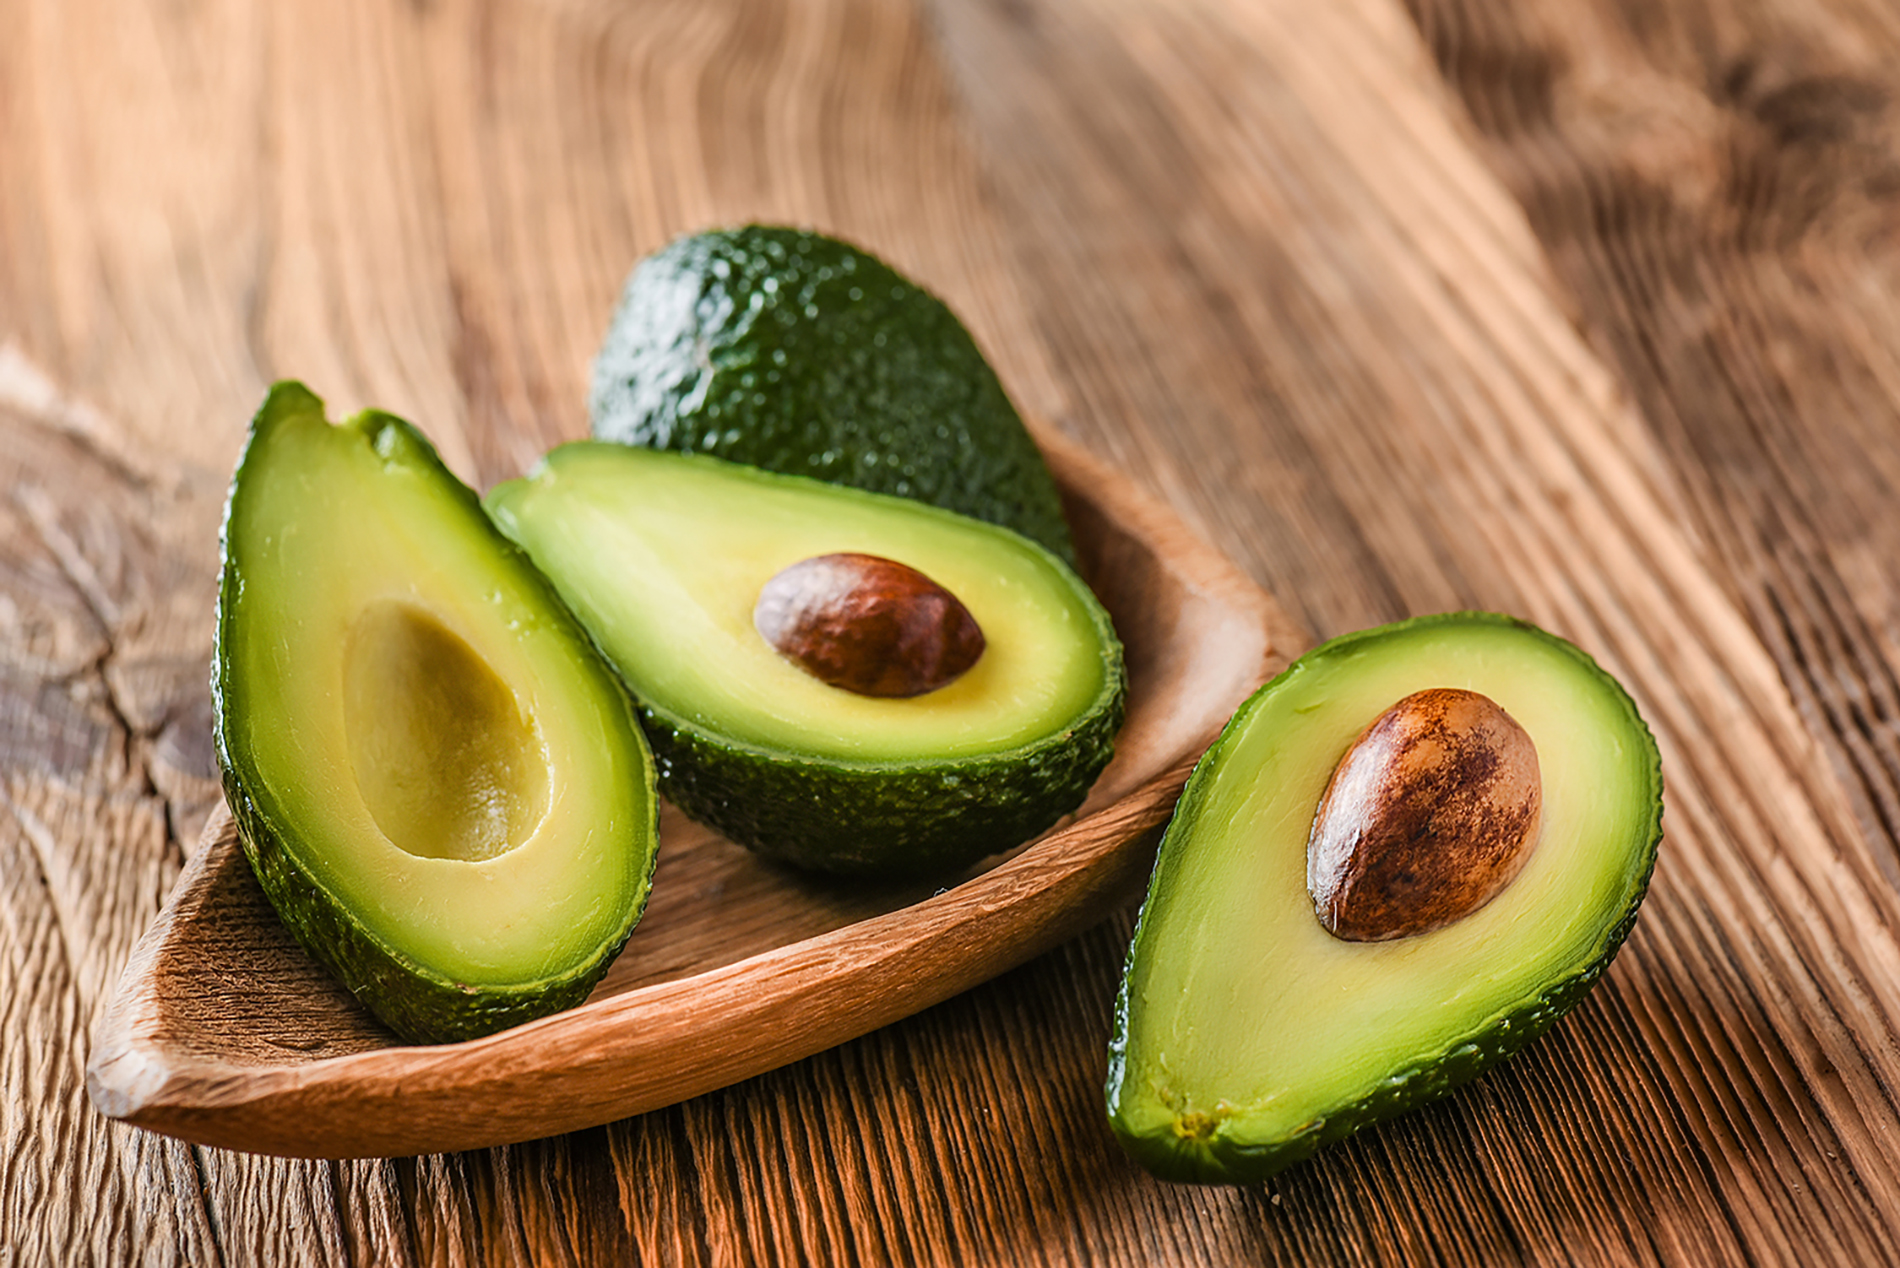 Learn About the Benefits of Avocados from Vitamin Source